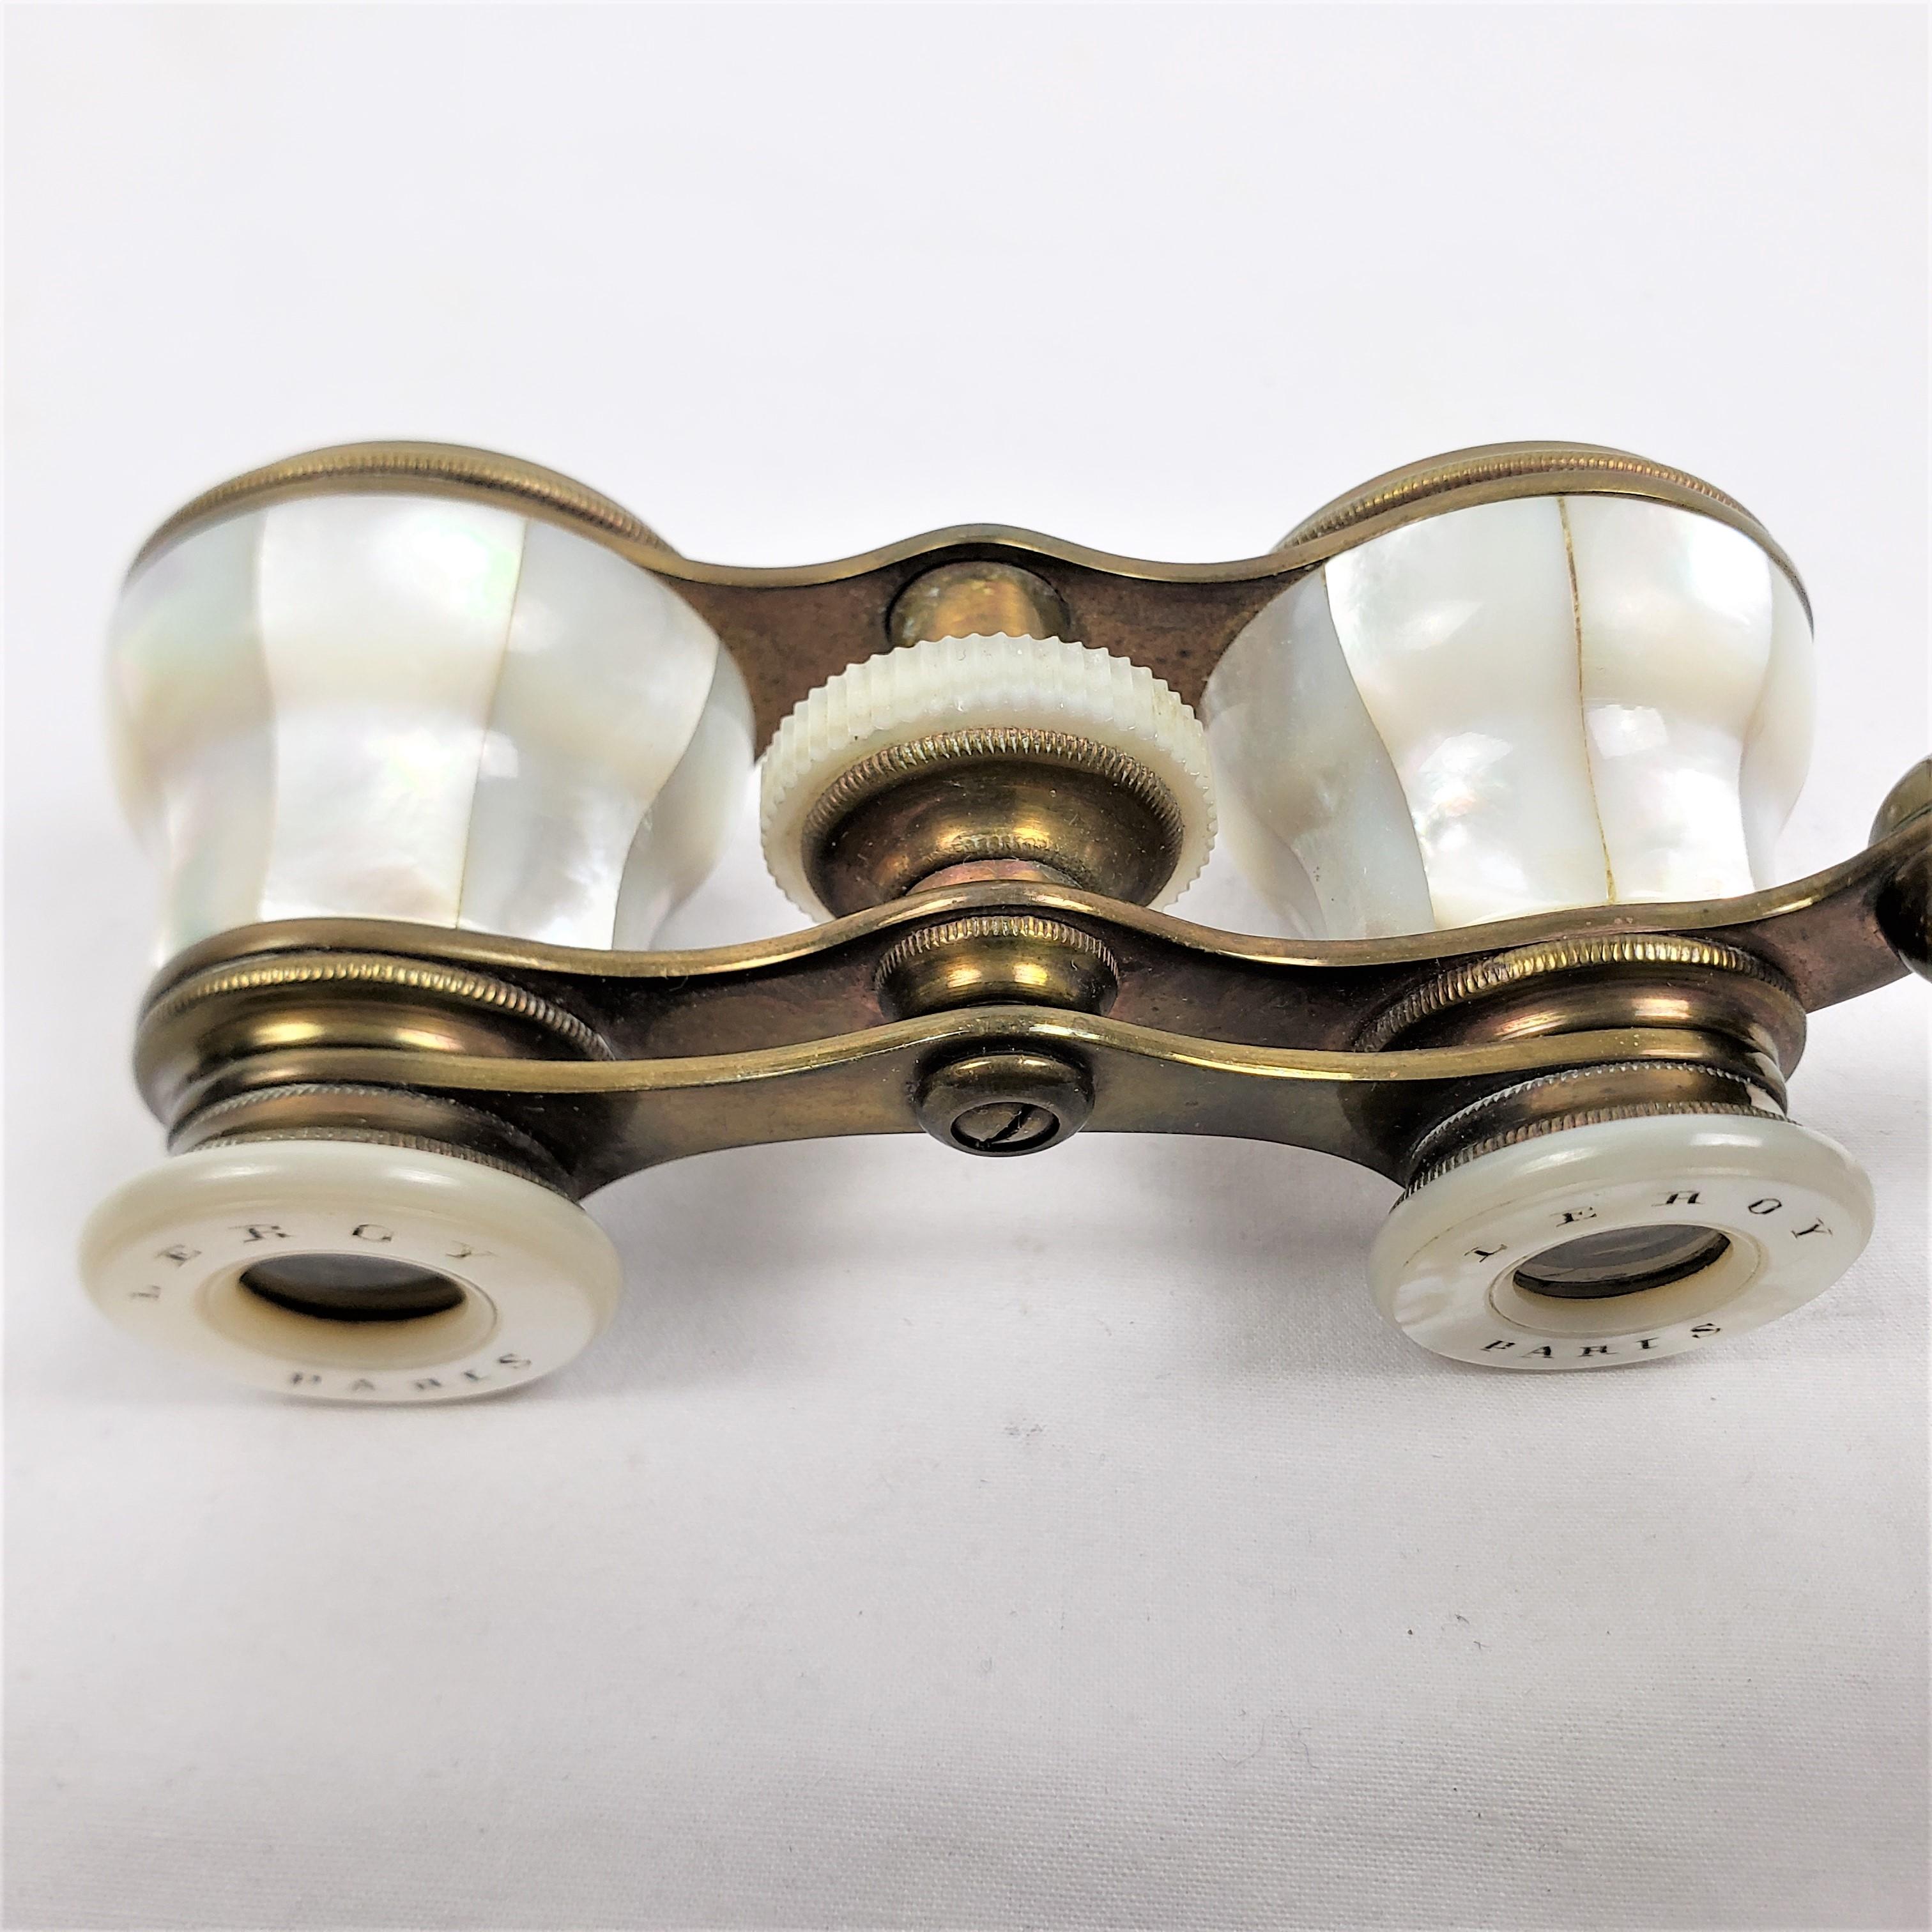 Antique French Lorgnette Binoculars or Opera Glasses in Brass & Mother of Pearl For Sale 7